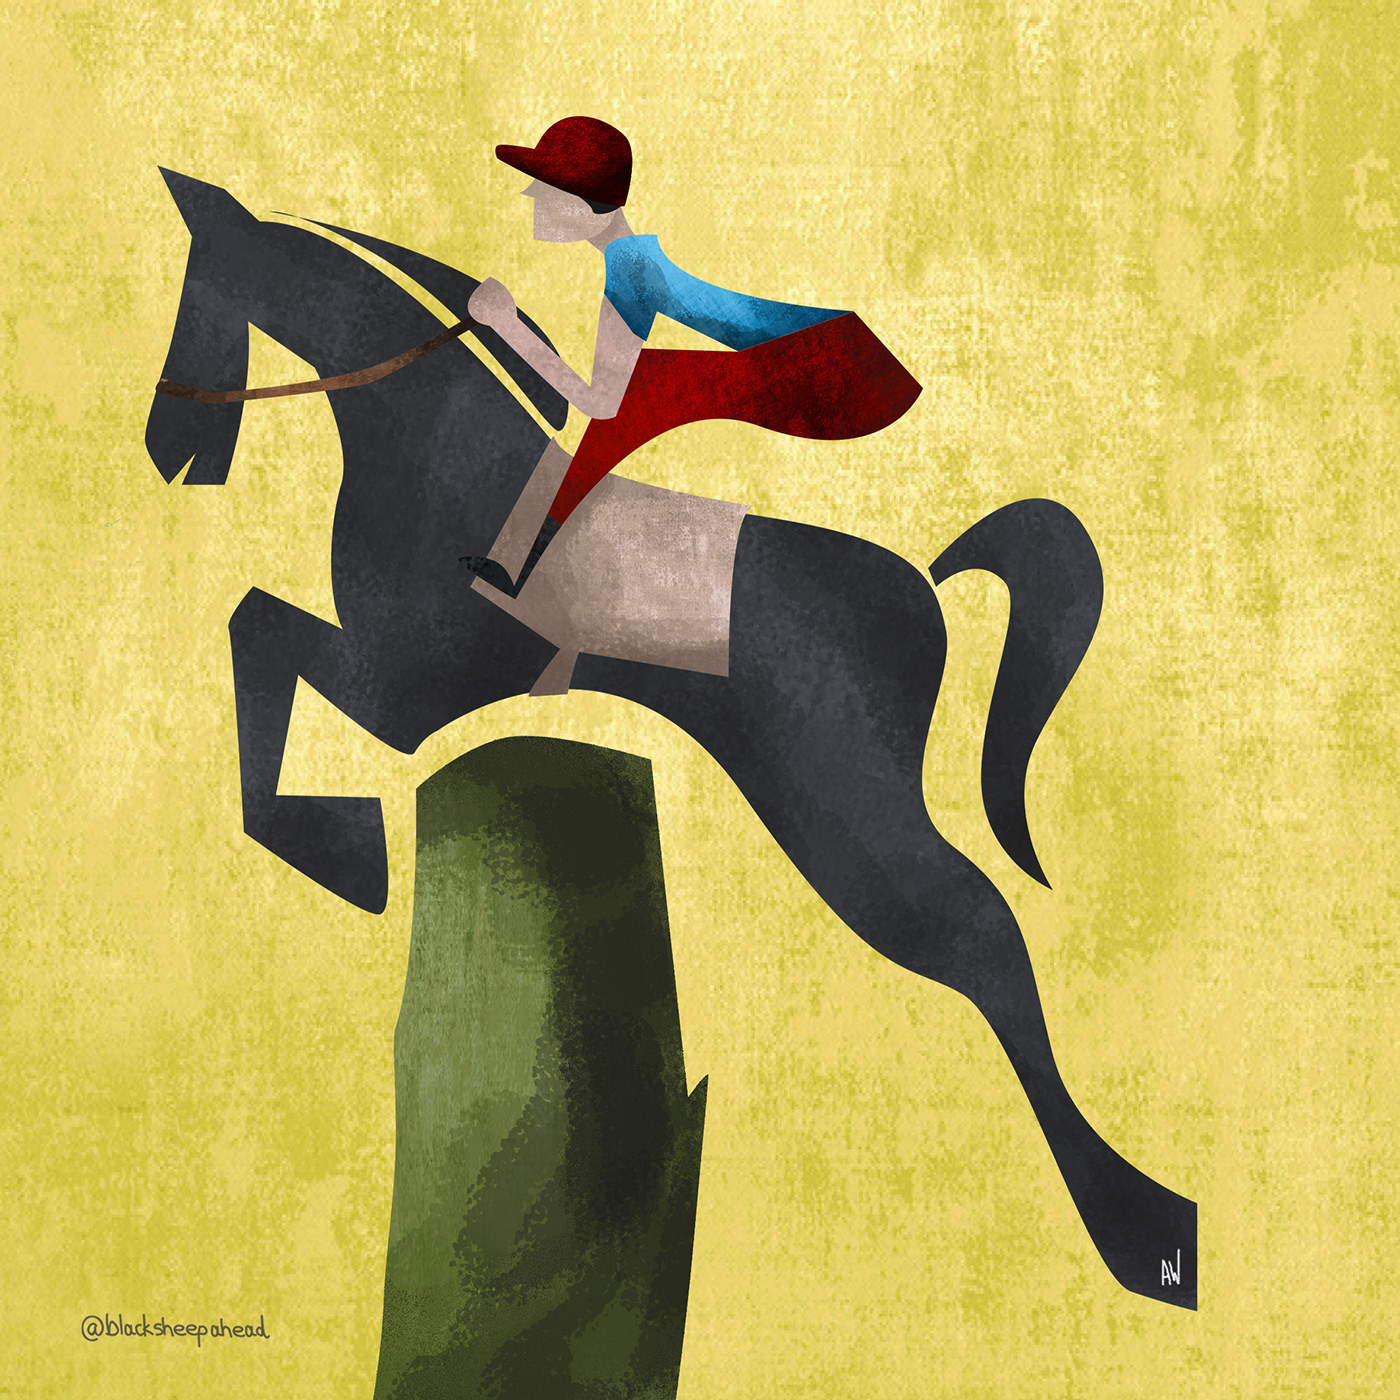 The grand national by Abi Fraser